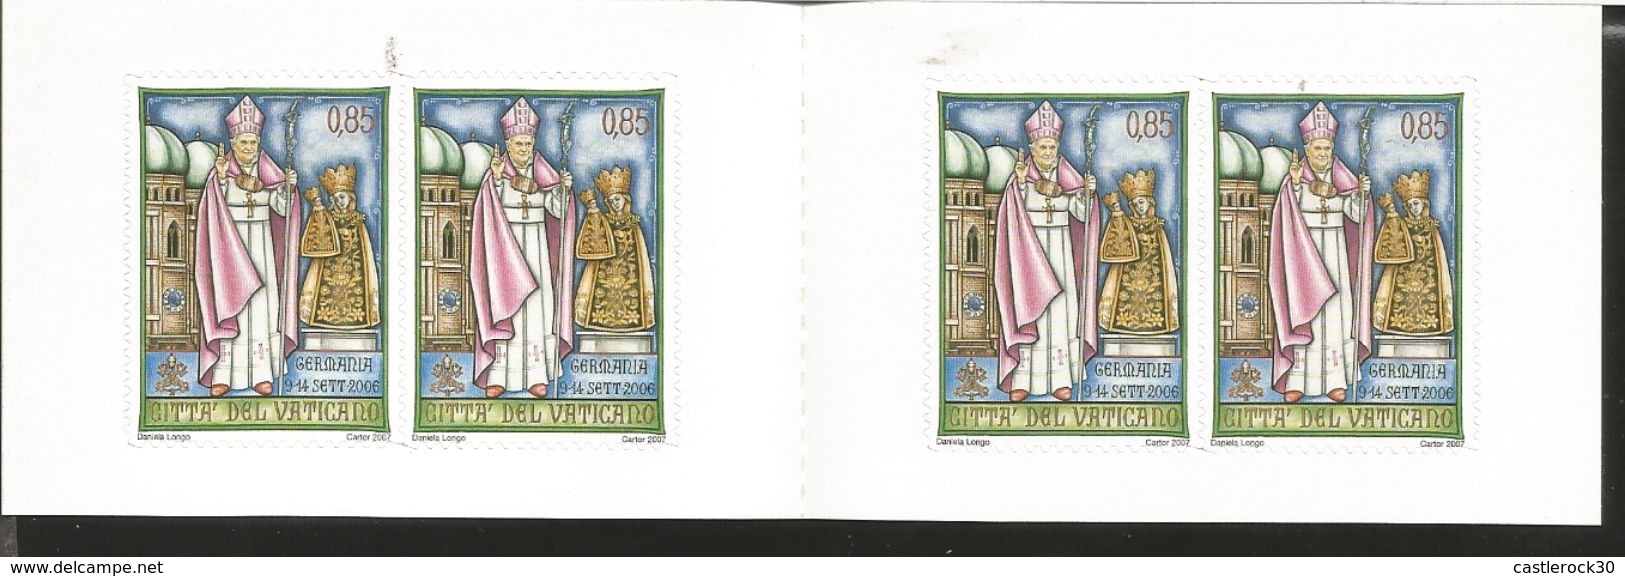 J) 2007 VATICAN CITY, BOOKLET, THE JOURNEYS OF THE HOLY FATHER IN THE WORLD, ADHESIVE STICKER, XF - Lettres & Documents